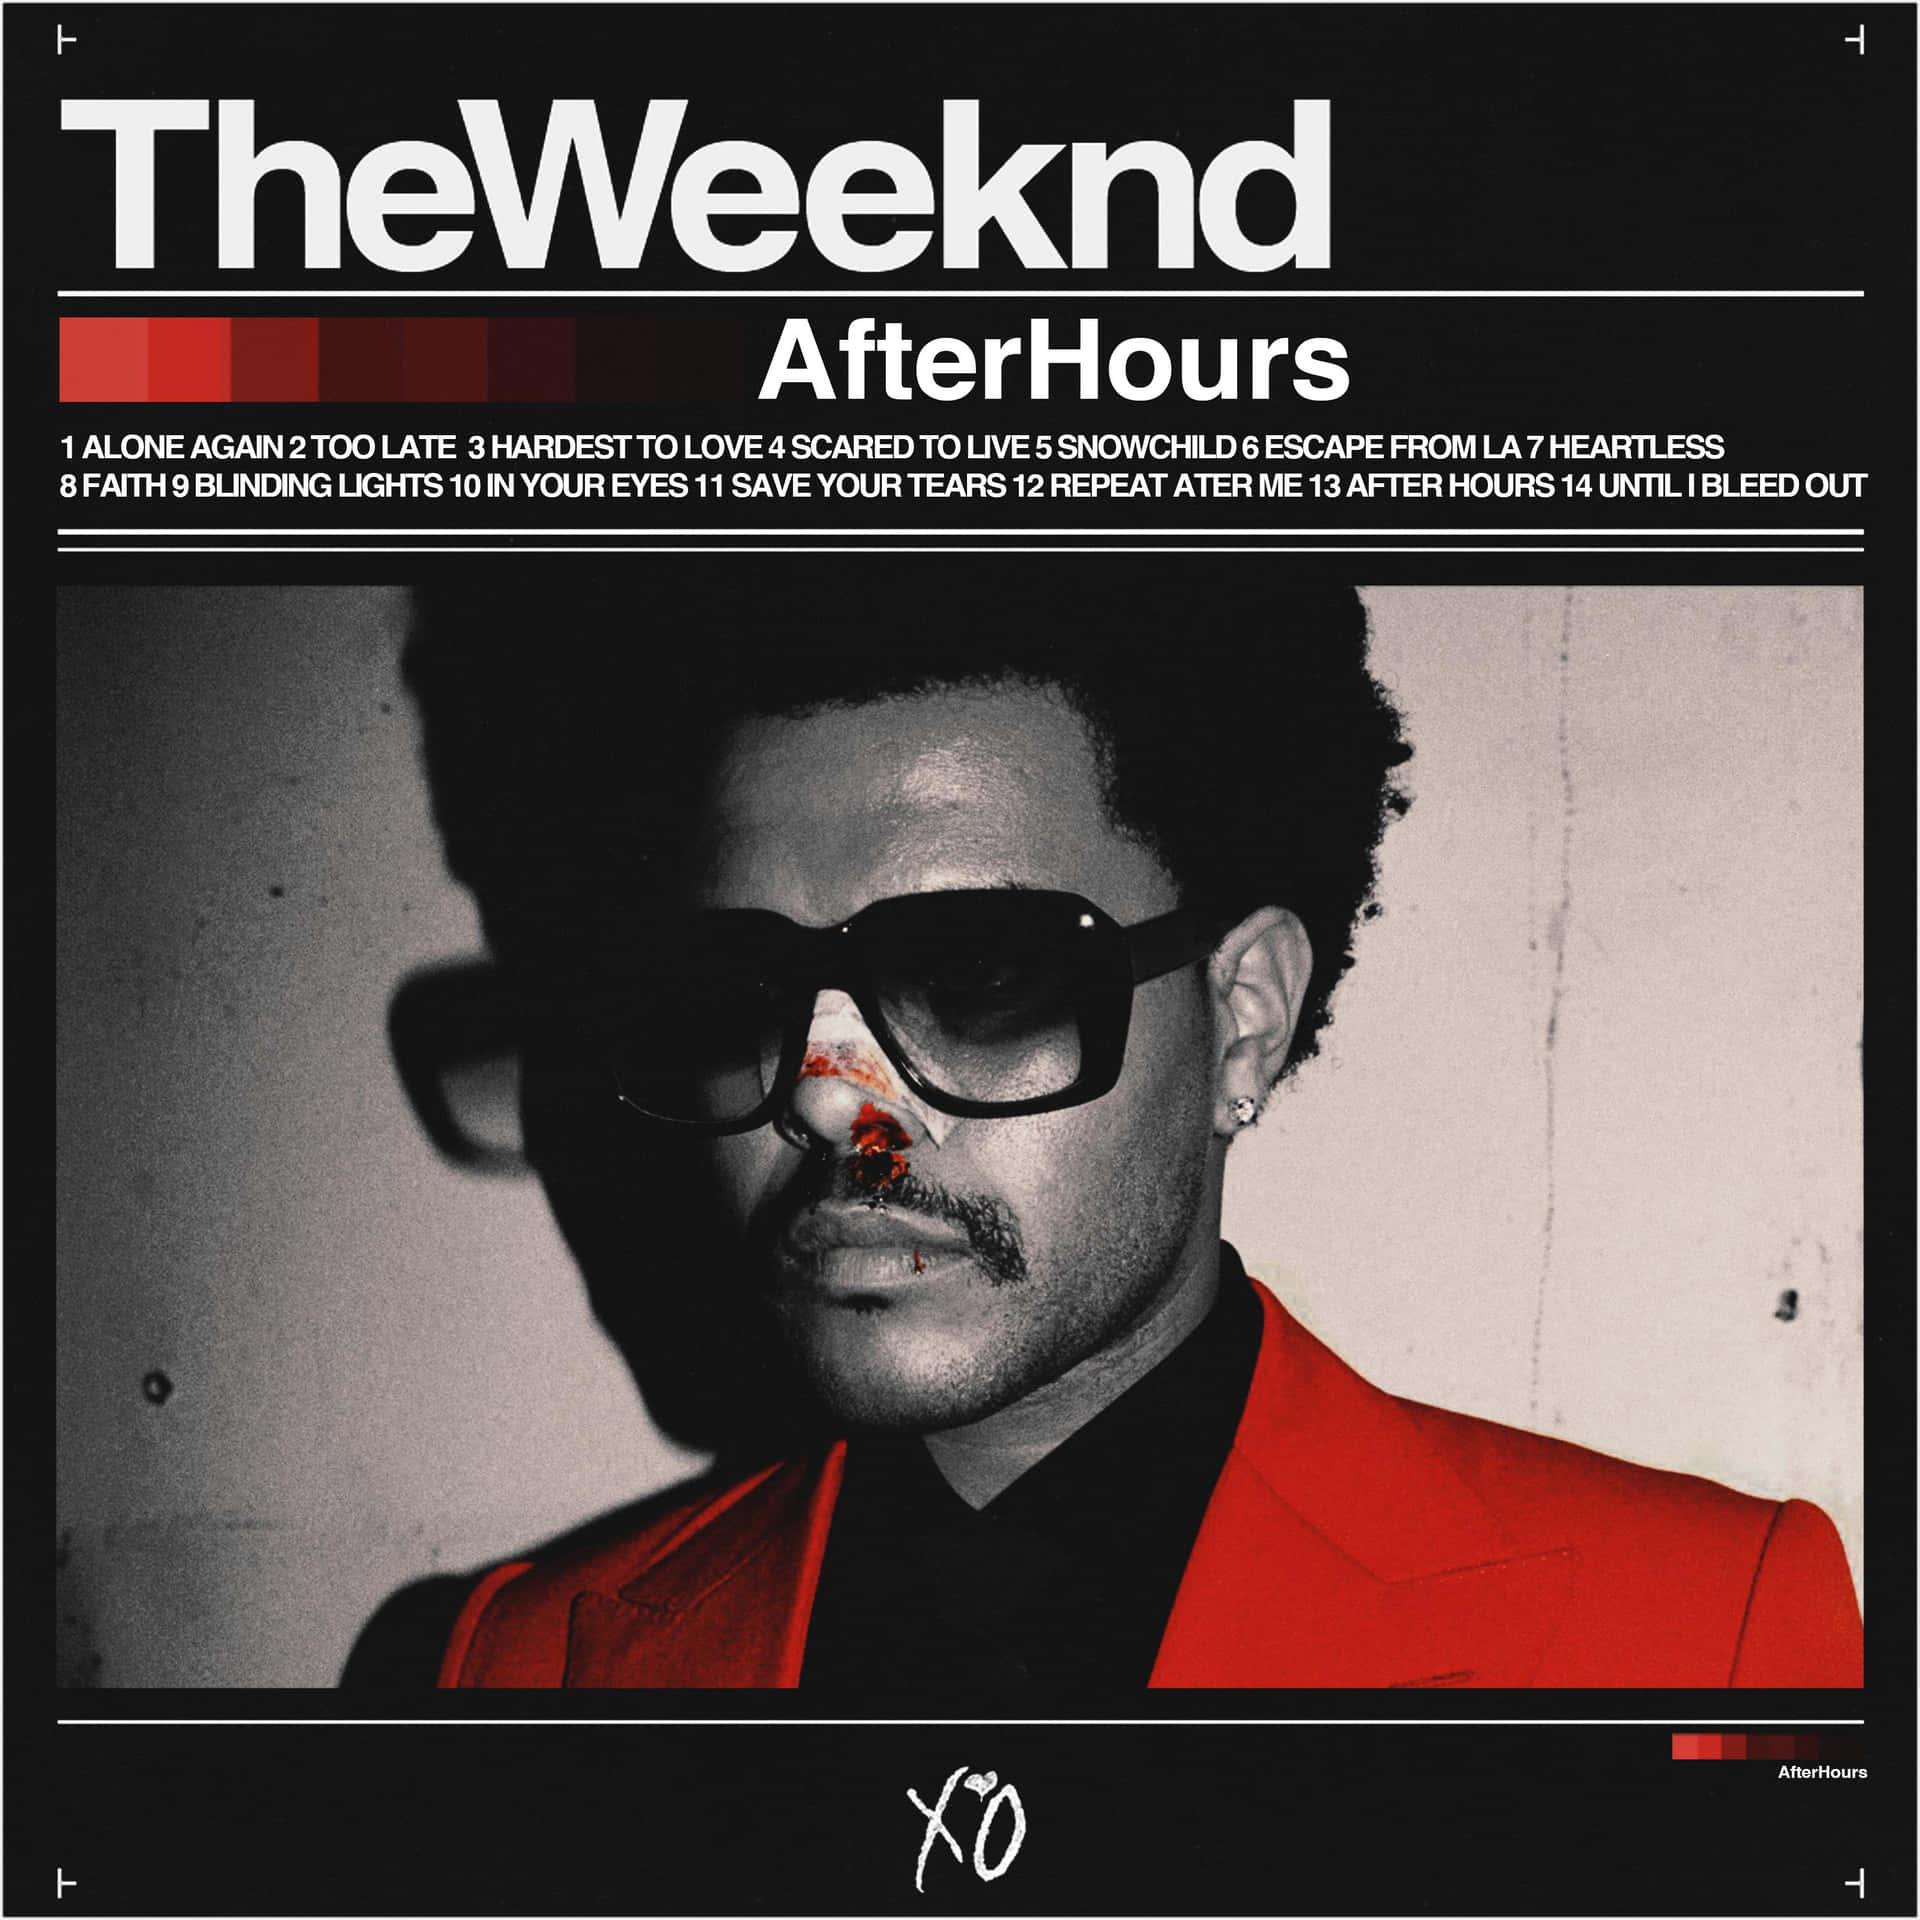 The Weeknd - After Hours Album Cover Art Wallpaper